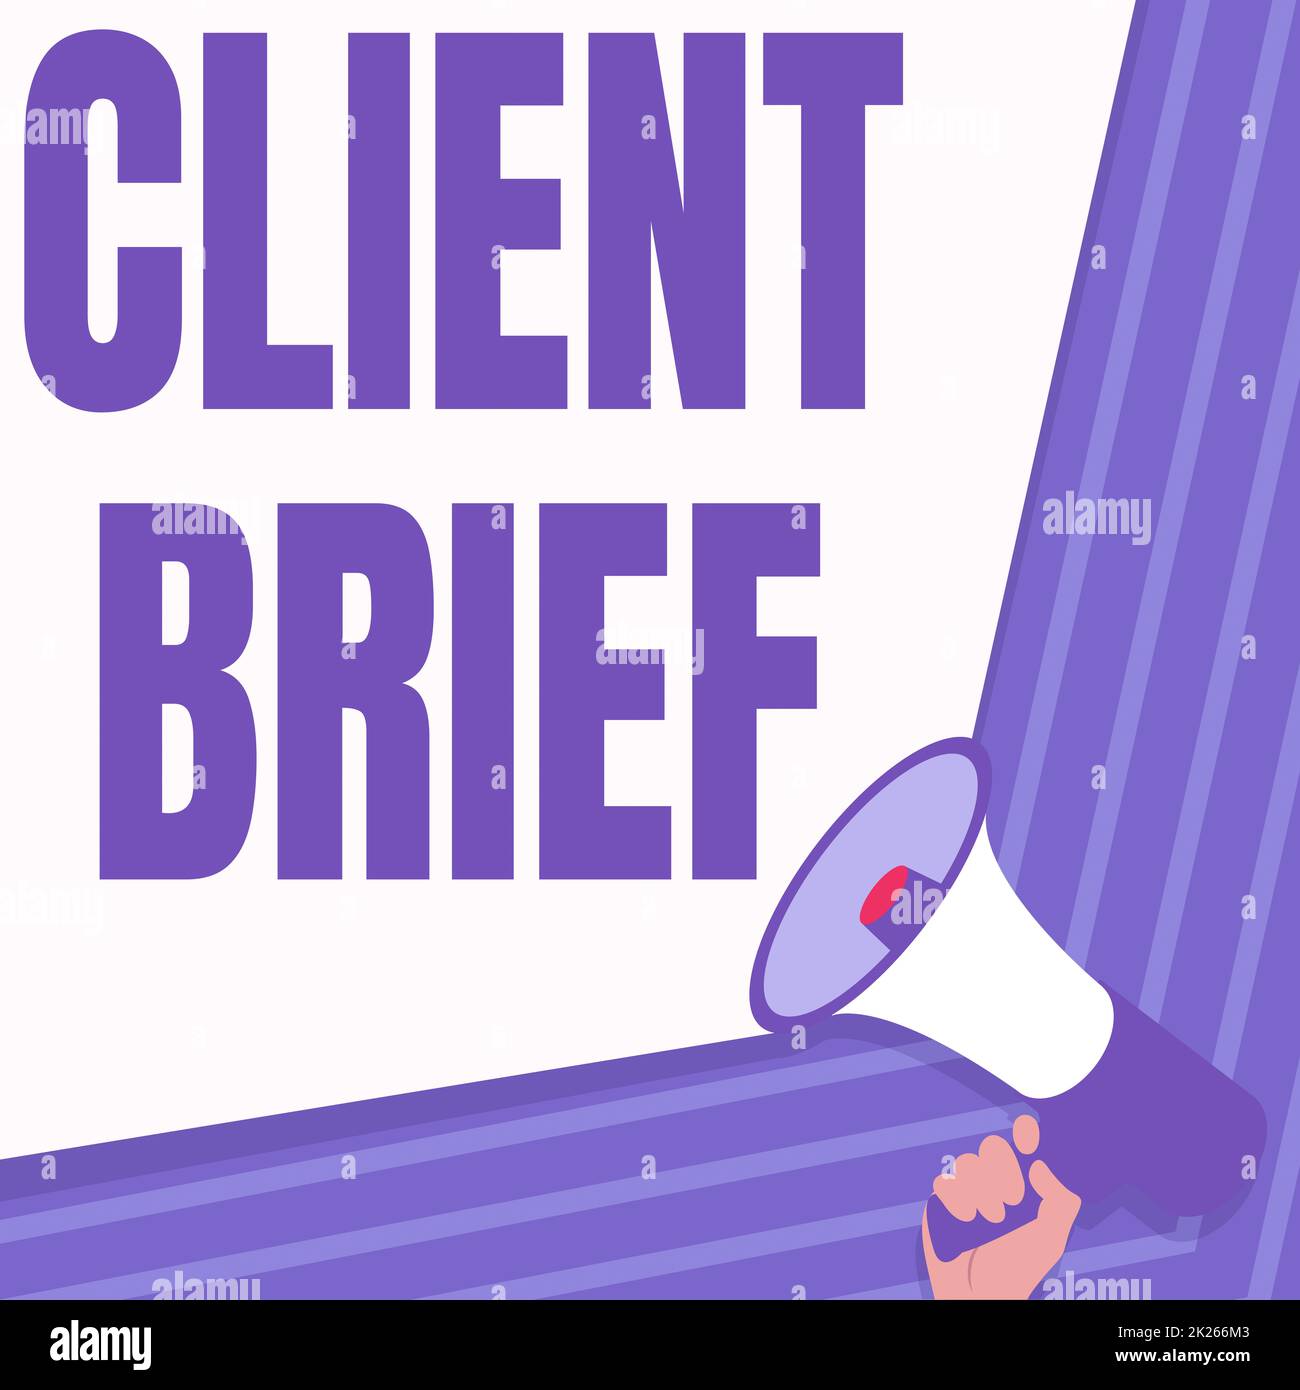 Conceptual caption Client Brief. Concept meaning the document granted by clients which contain business details Illustration Of Hand Holding Megaphone Making Wonderfull Announcement. Stock Photo